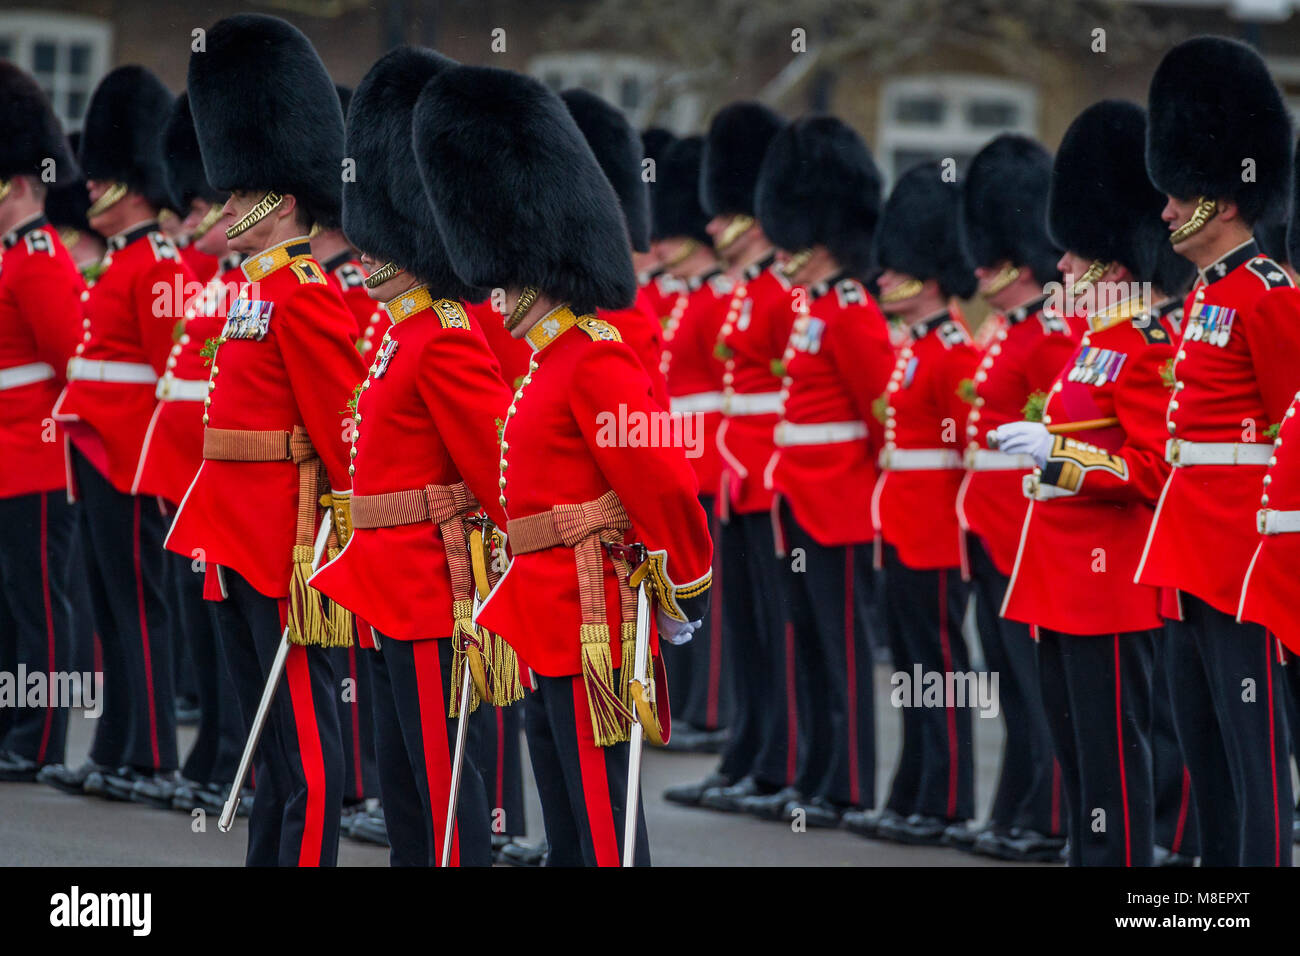 London, UK, 17 Mar 2018. The Duke of Cambridge, Colonel of the Irish Guards, accompanied by The Duchess of Cambridge, visited the 1st Battalion Irish Guards at their St. Patrick's Day Parade. Credit: Guy Bell/Alamy Live News Stock Photo